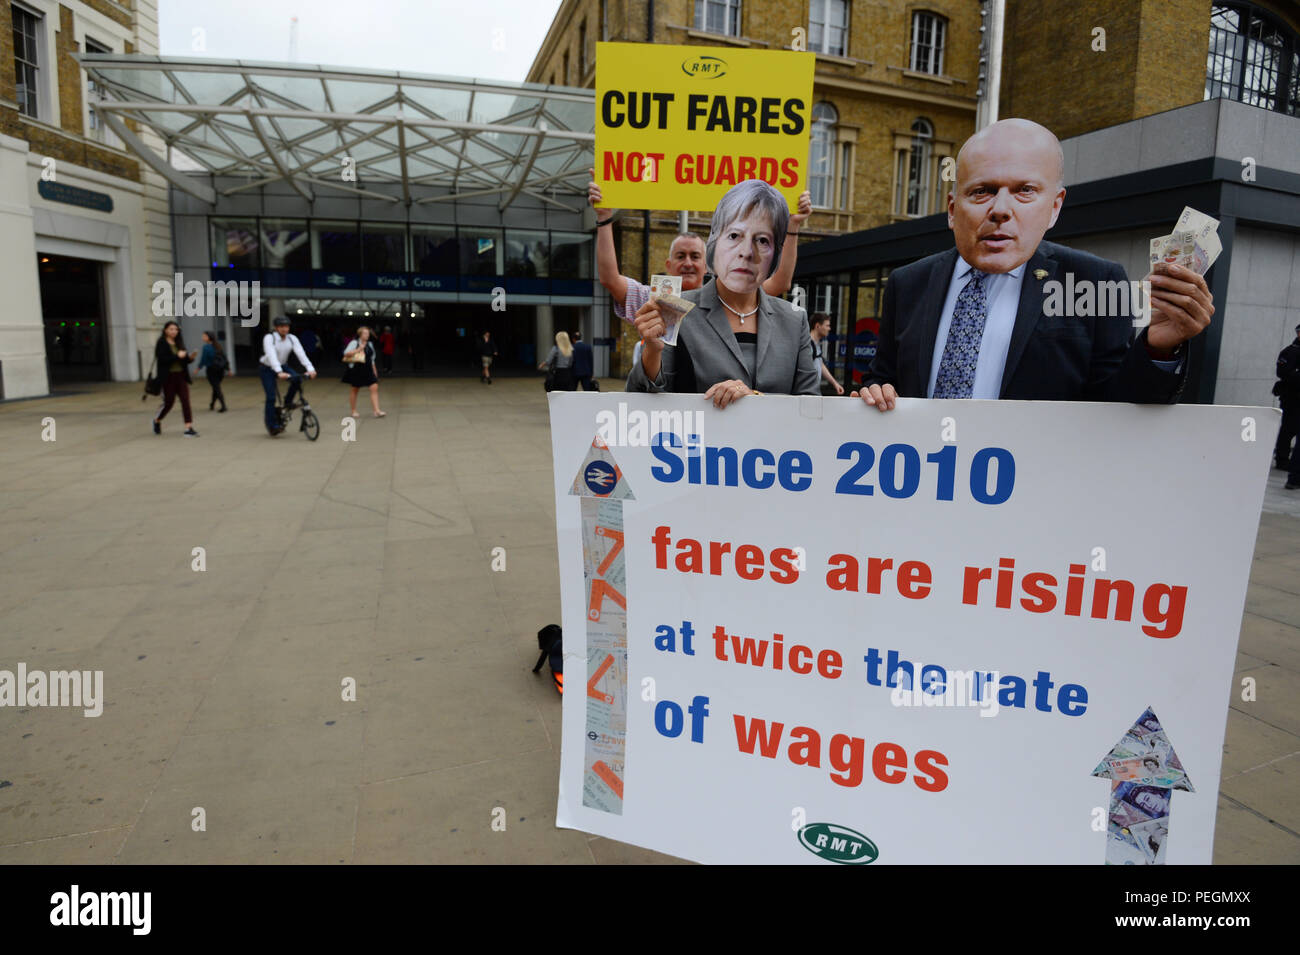 Members of the Rail, Maritime and Transport union (RMT) dressed as Prime Minister Theresa May and Transport Secretary Chris Grayling take part in a protest over train fares outside King's Cross station in London. Stock Photo